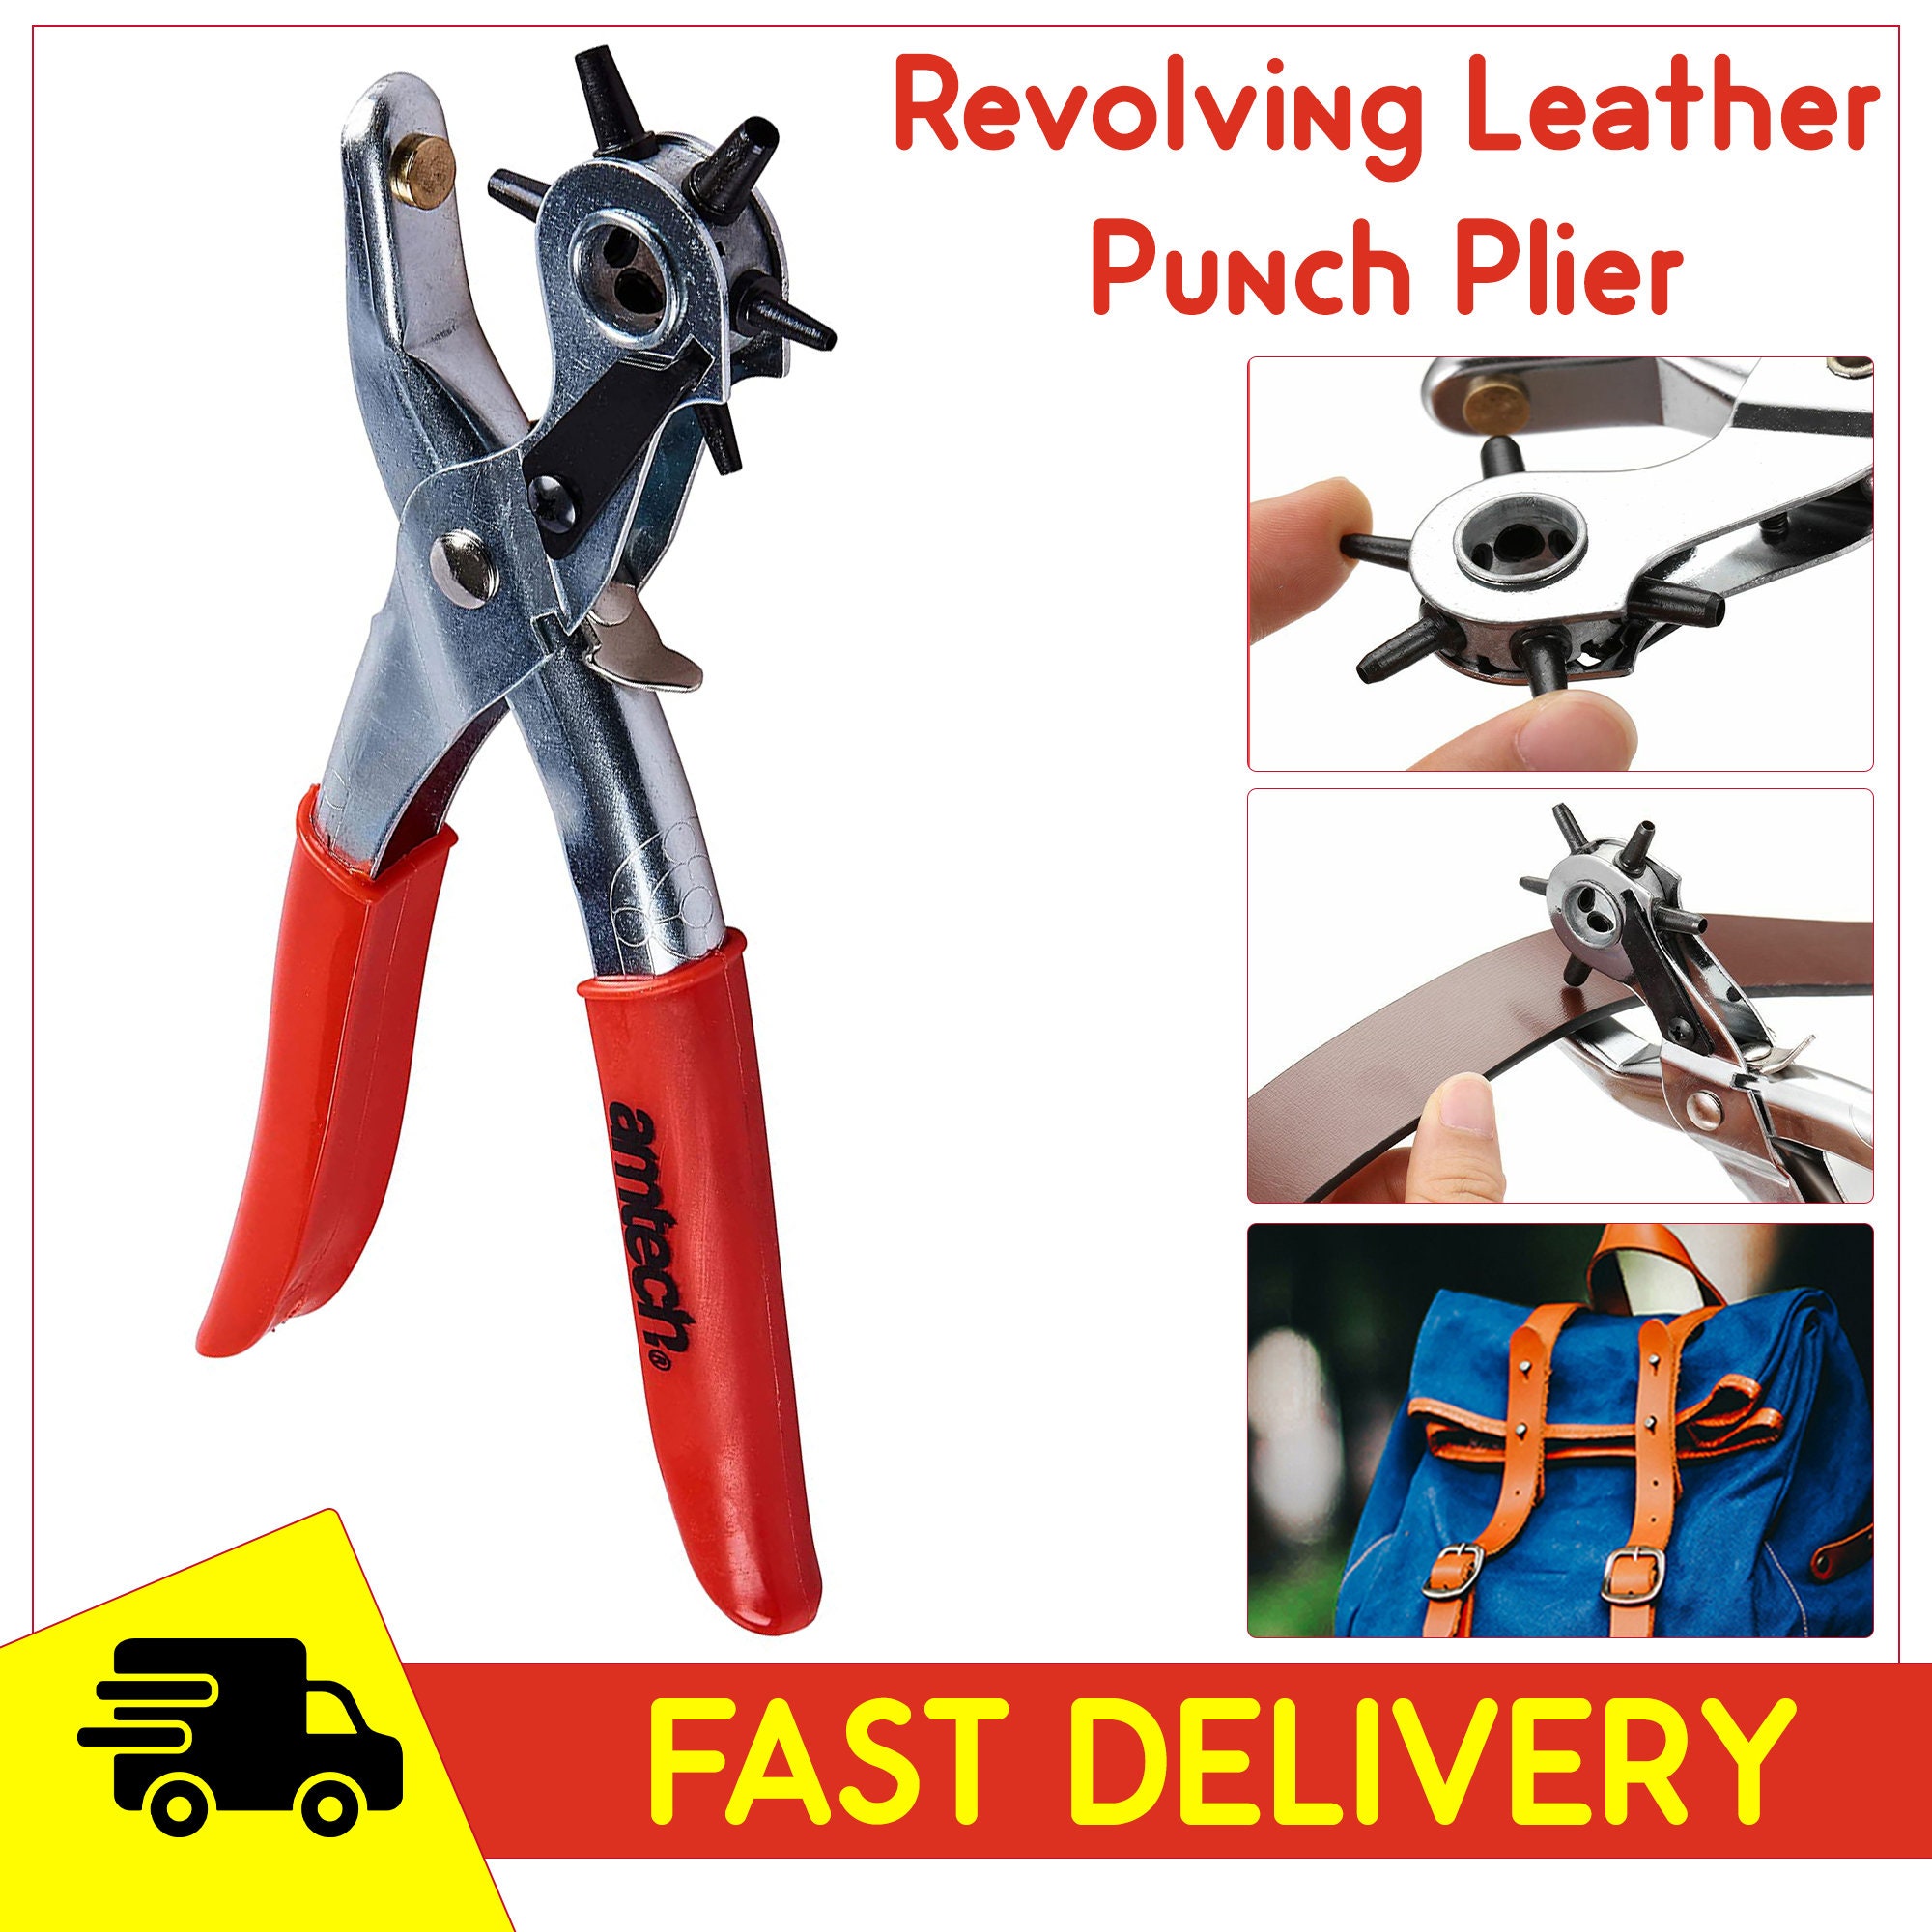 7'Heavy Duty Leather Hole Puncher with 6 Punch Sizes for Belts, Fabric, DIY  Home or Craft Projects - China Hole Punch, for Watch Bands